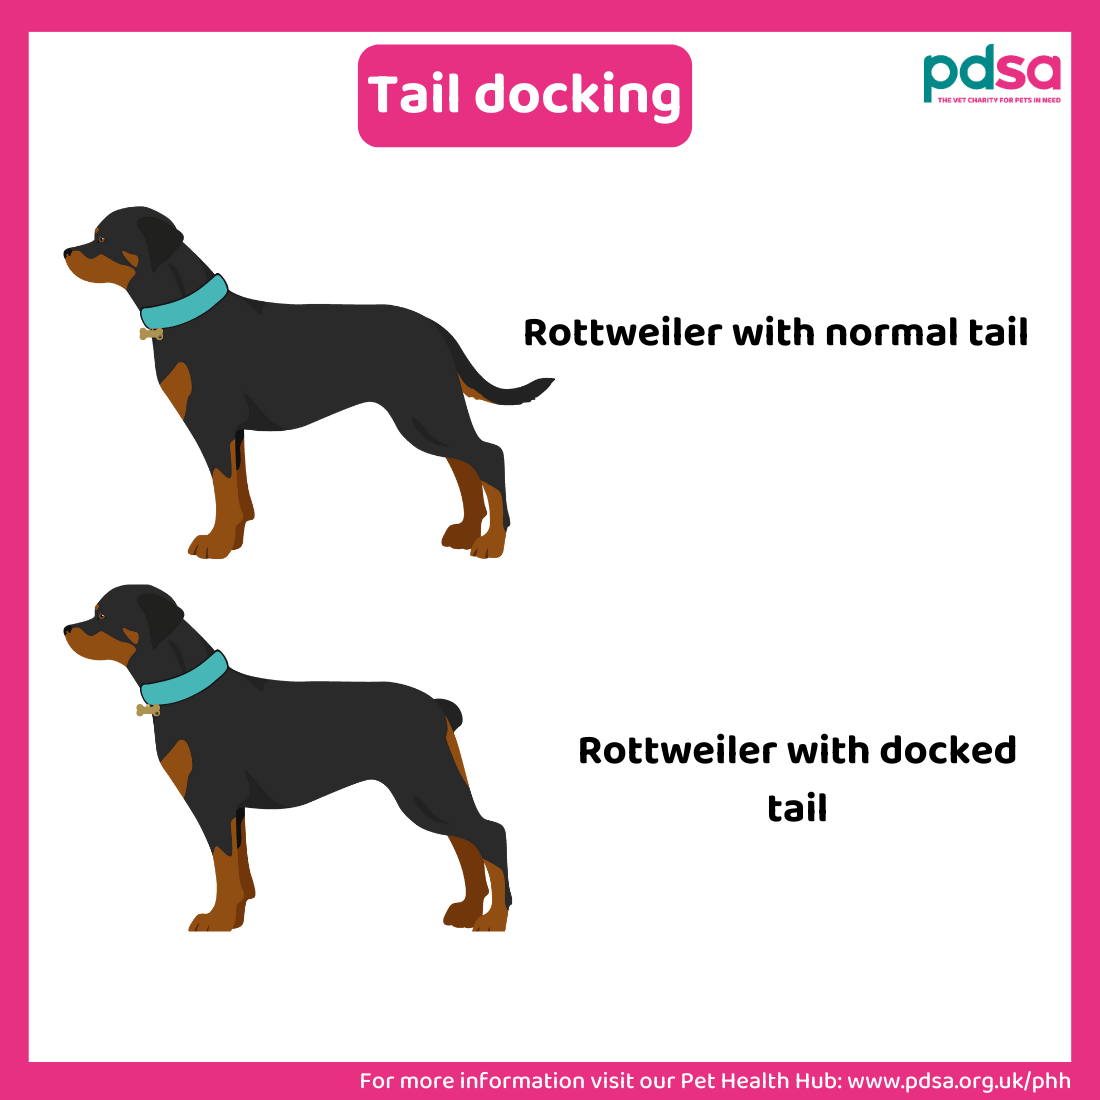 An illustration showing the difference between a normal tail and a docked tail